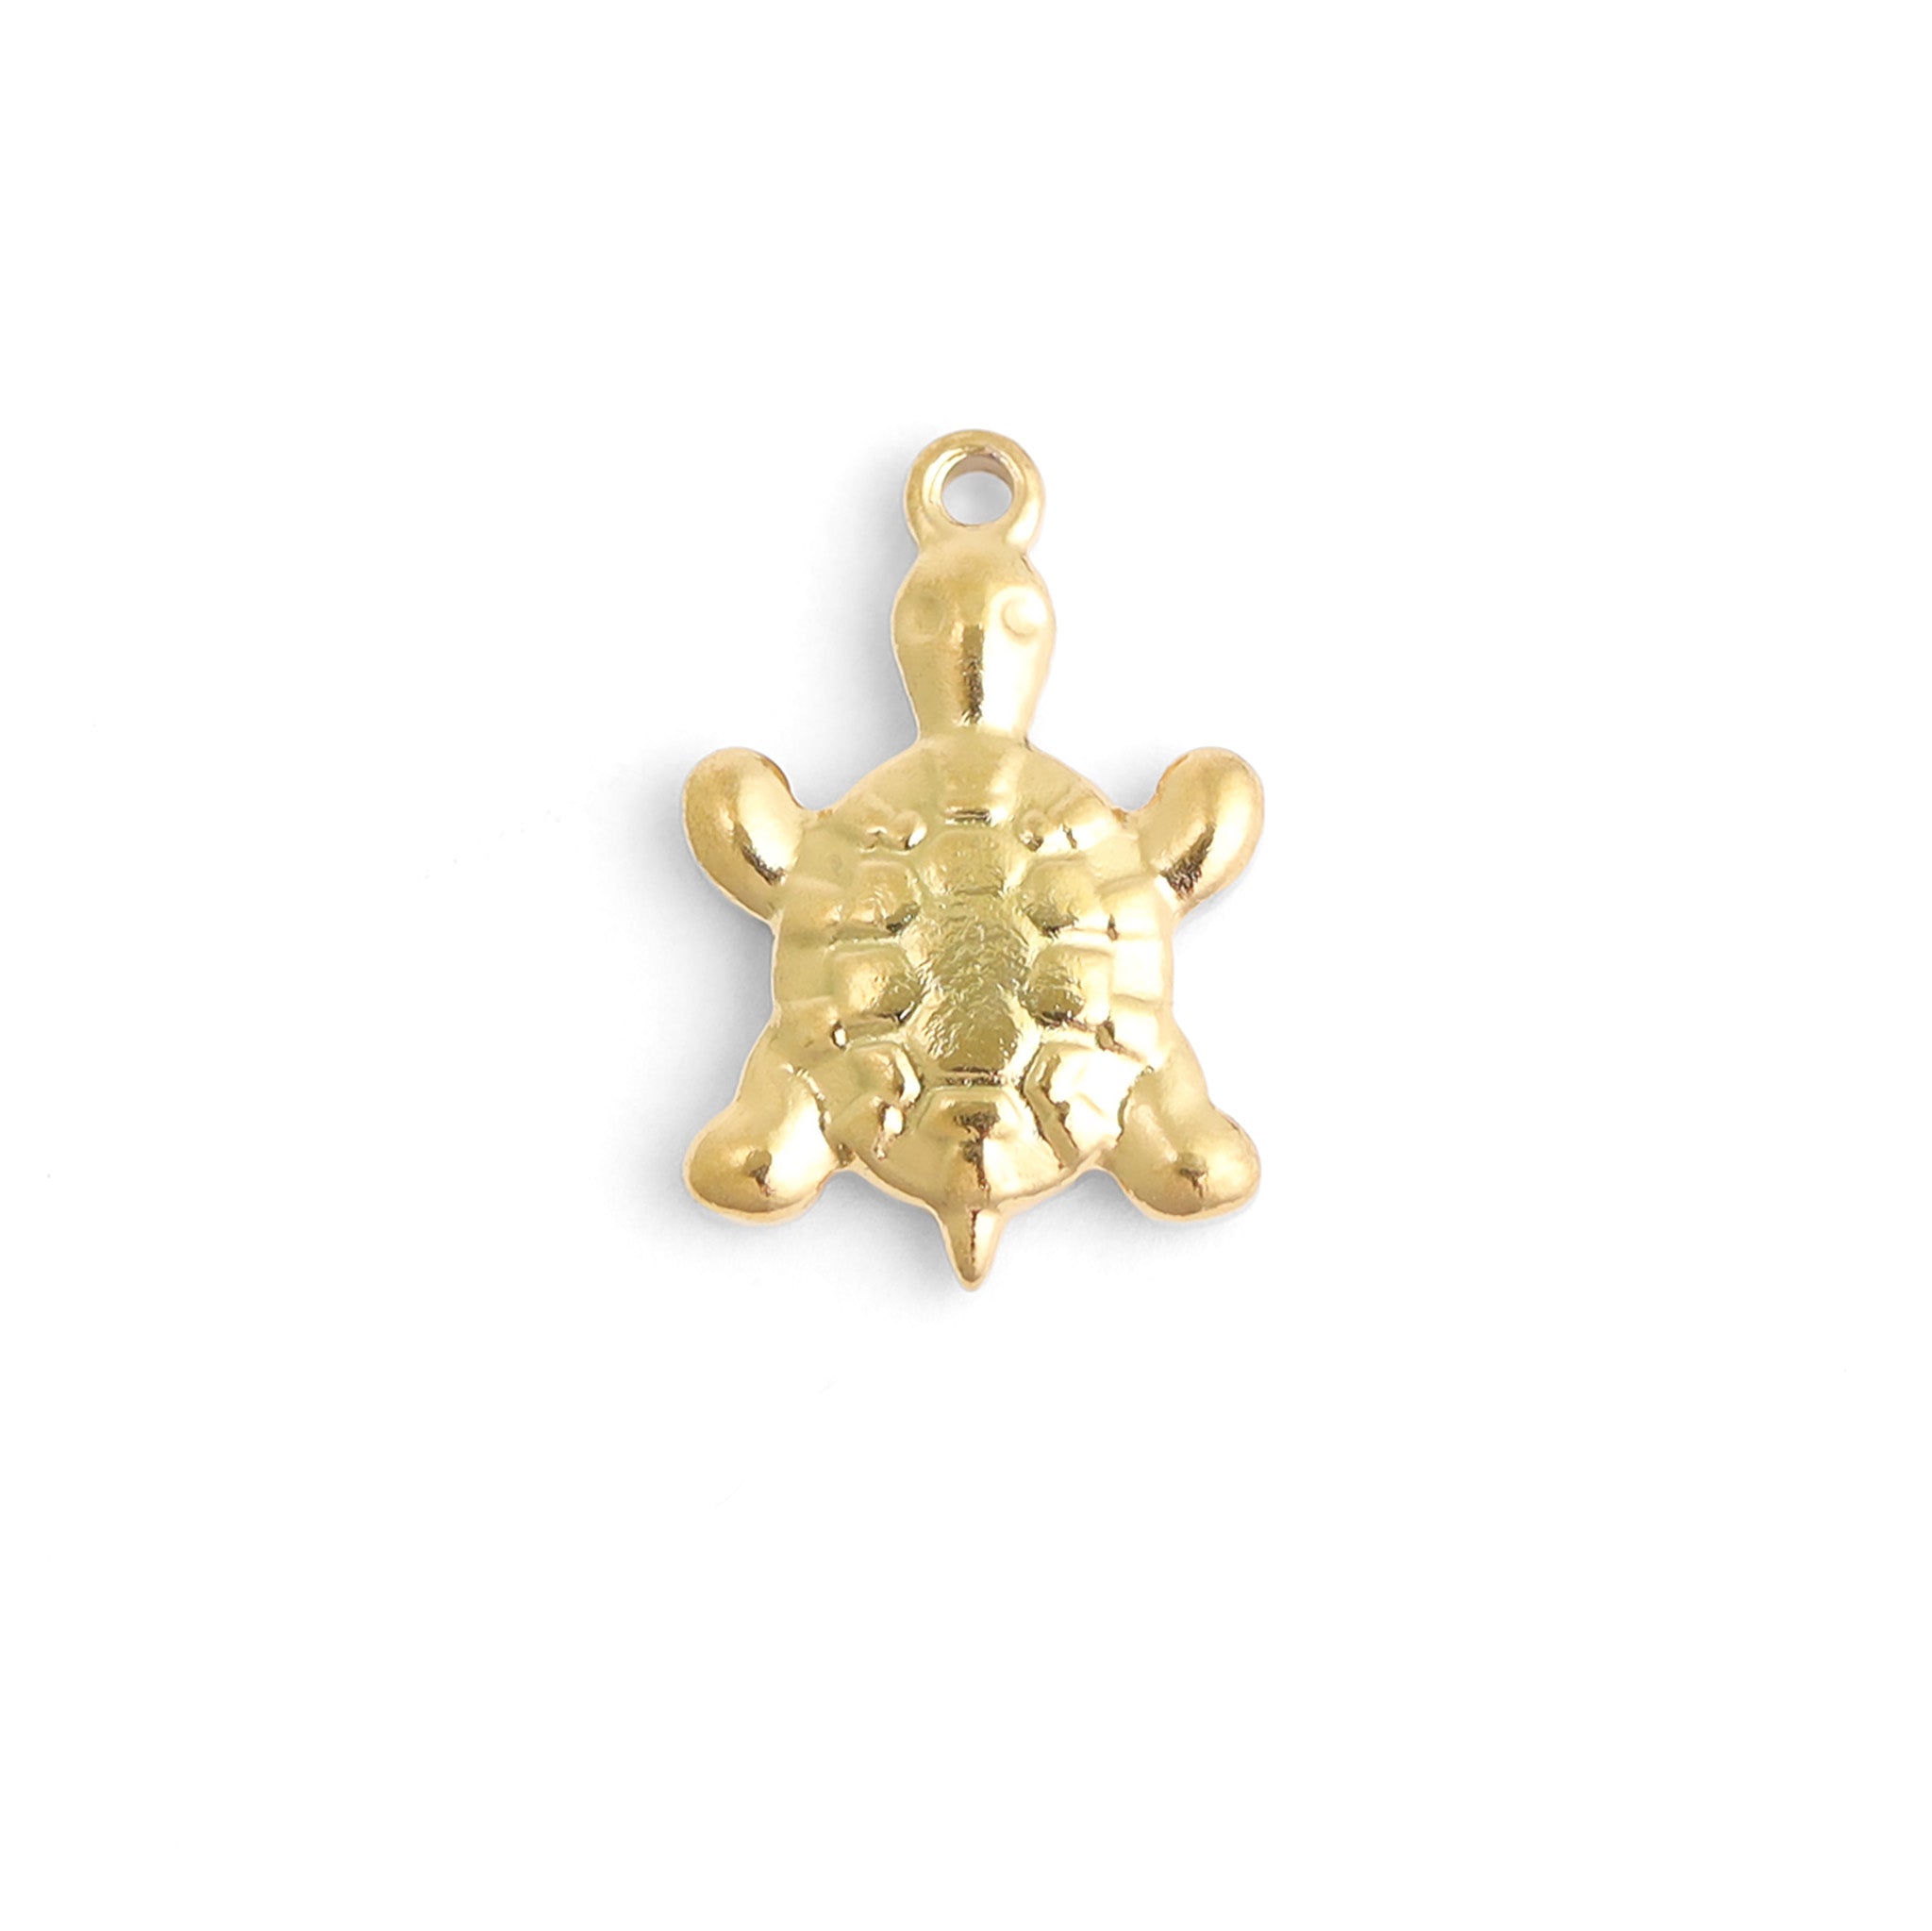 18K Gold PVD Stainless Steel Sea Turtle Charm / PDL0101